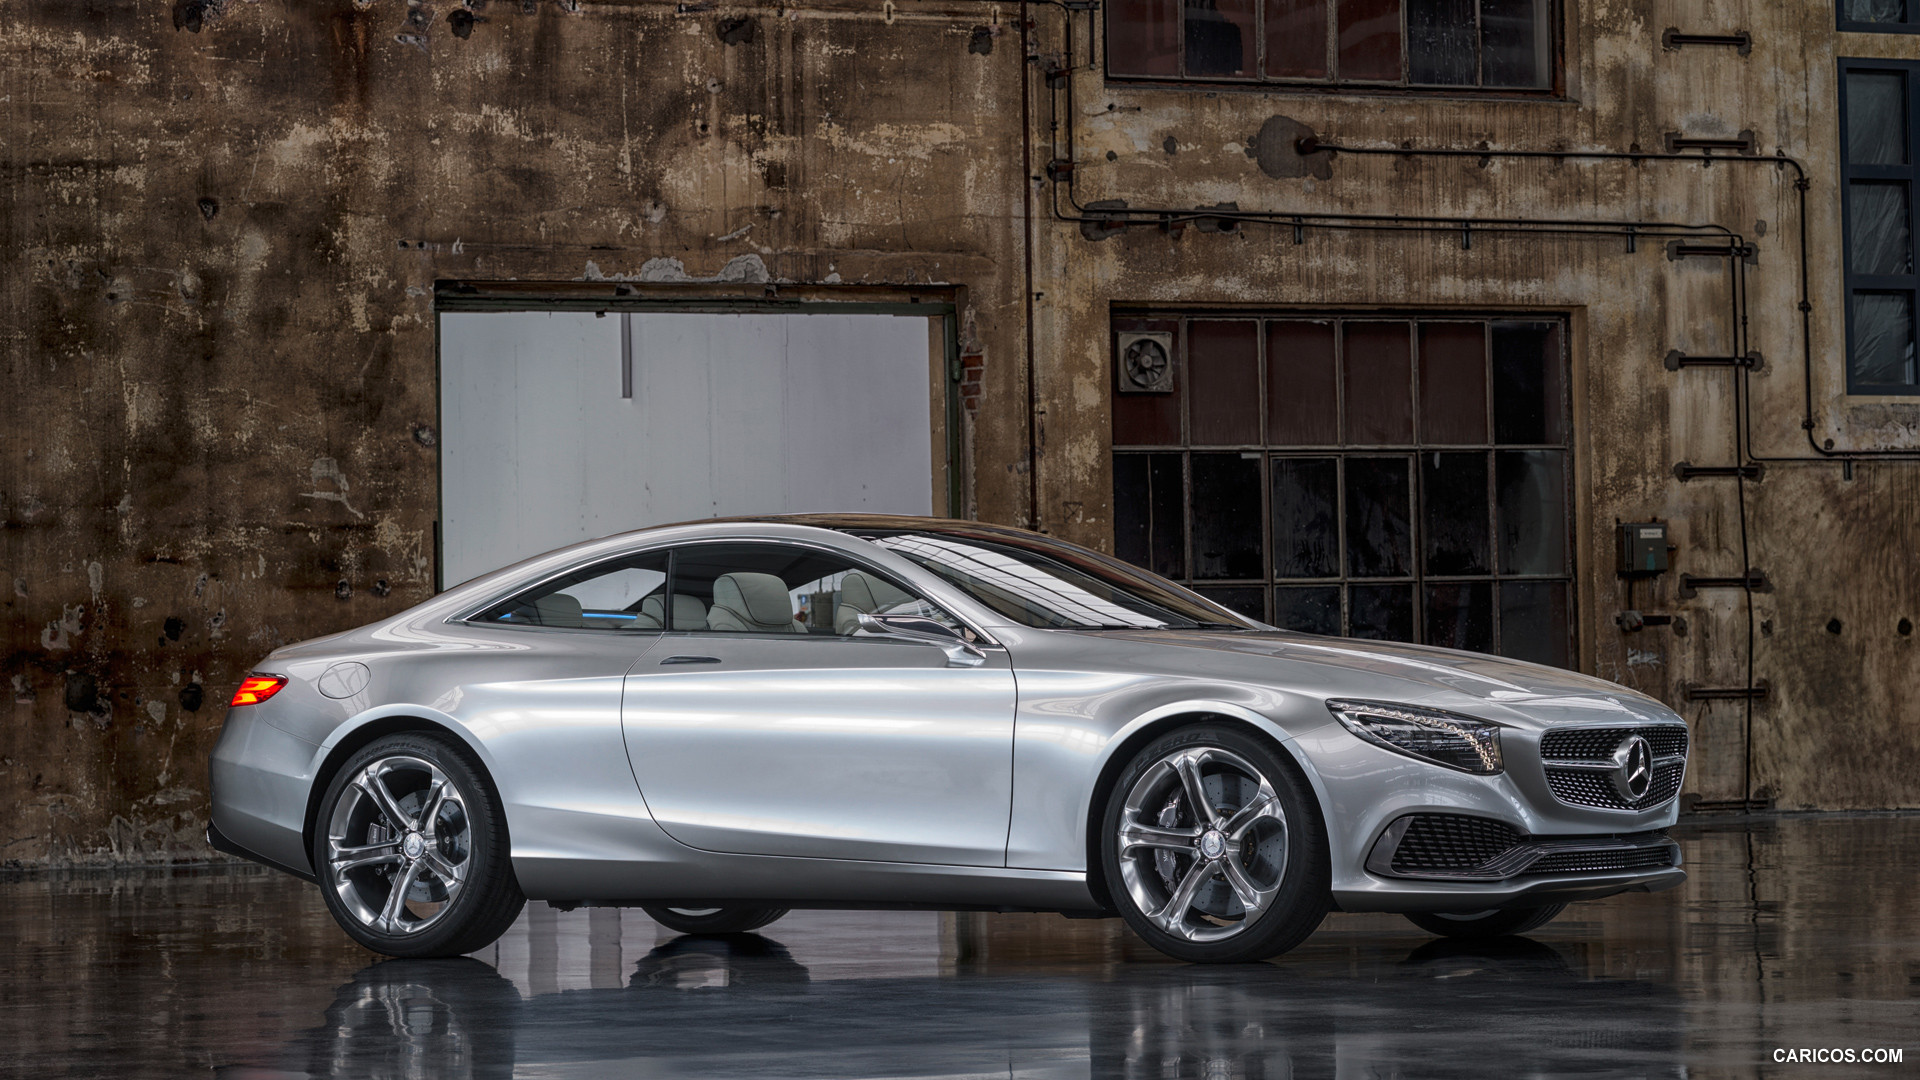 Mercedes-Benz S-Class Coupe Concept (2013)  - Side, #11 of 58